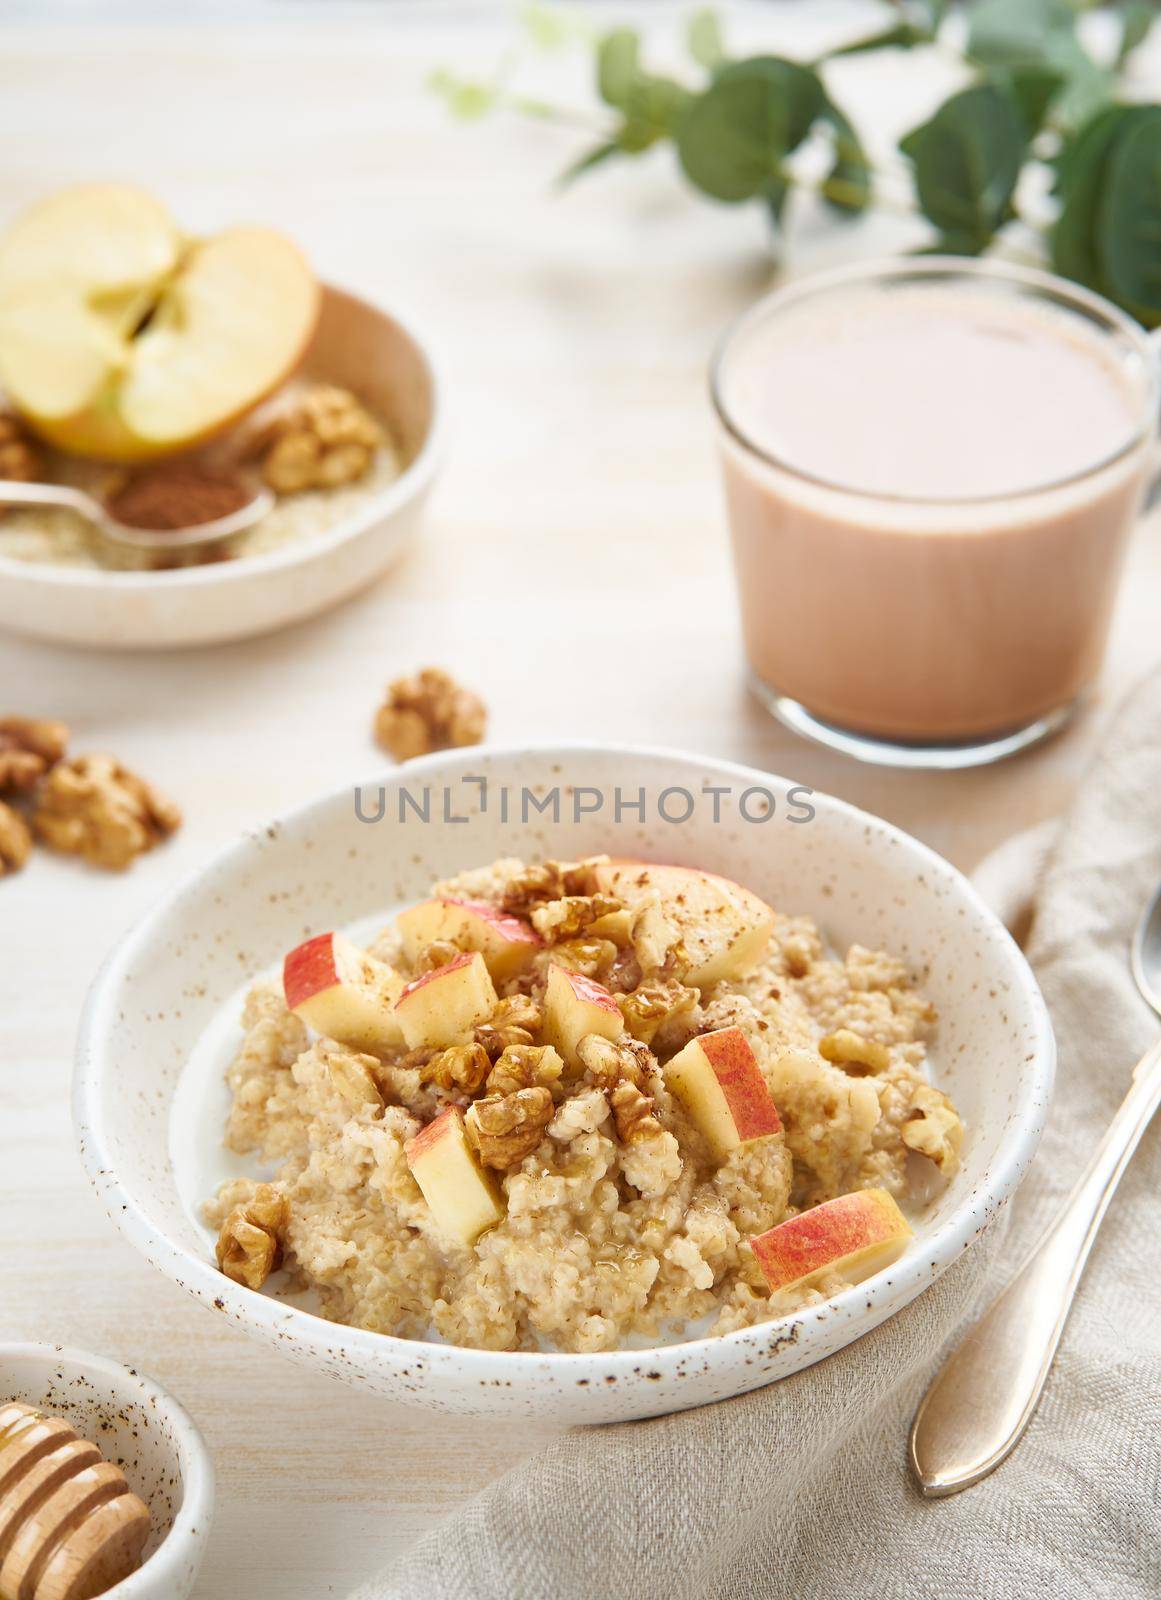 Oatmeal with apple, nuts, cinnamon, honey and cup of hot chocolate on white wooden light background. Vertical. Healthy diet breakfast